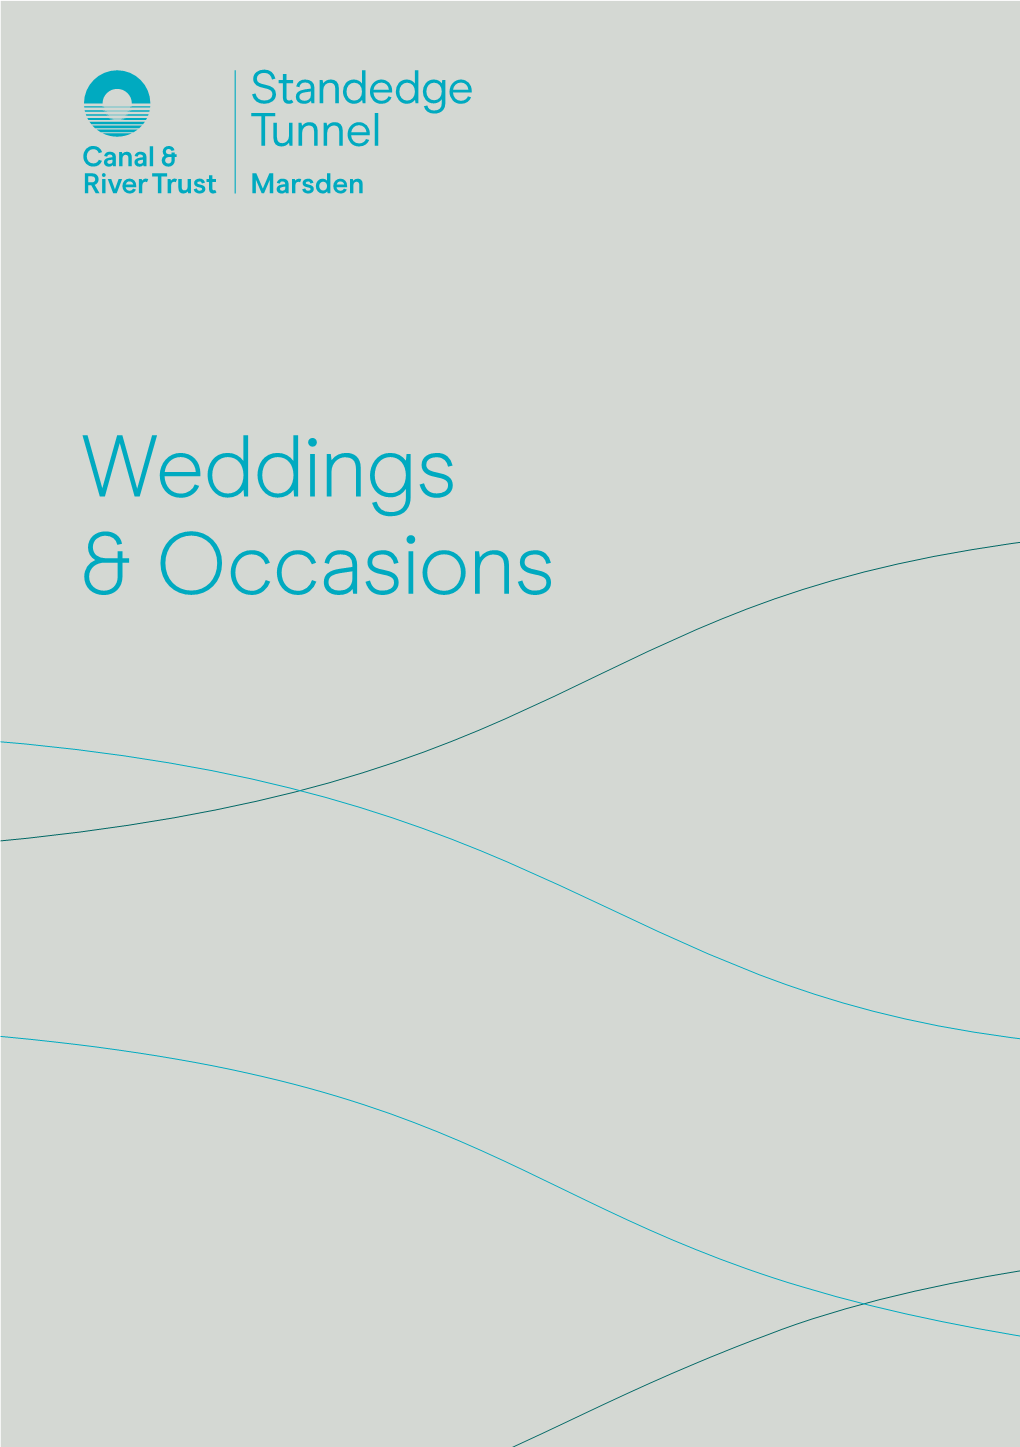 Weddings & Occasions